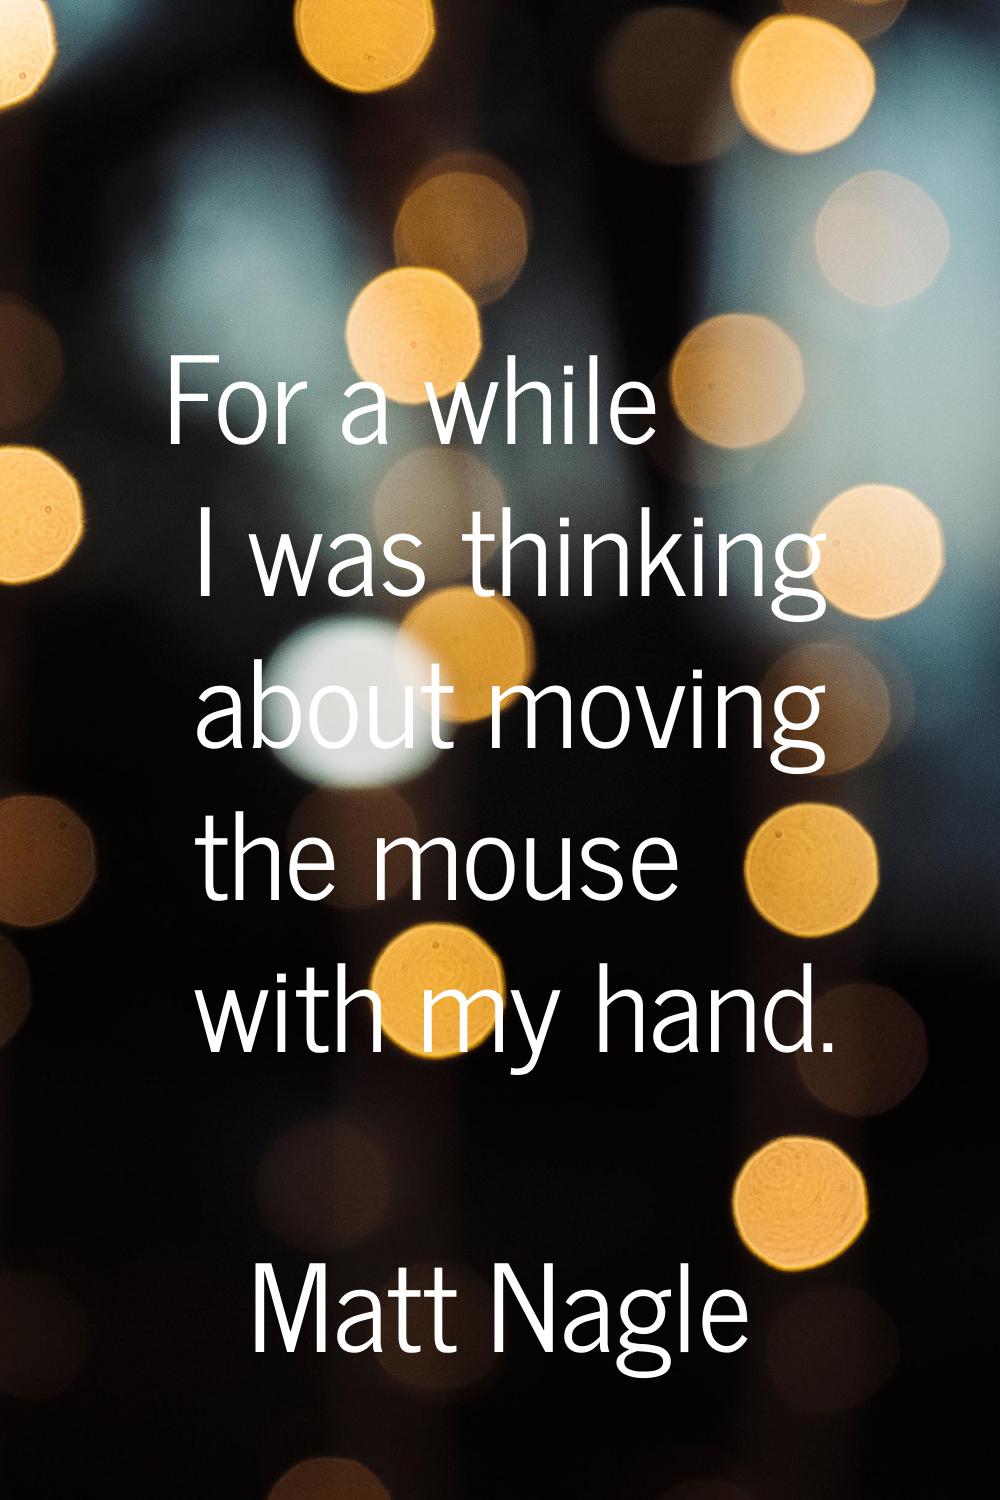 For a while I was thinking about moving the mouse with my hand.